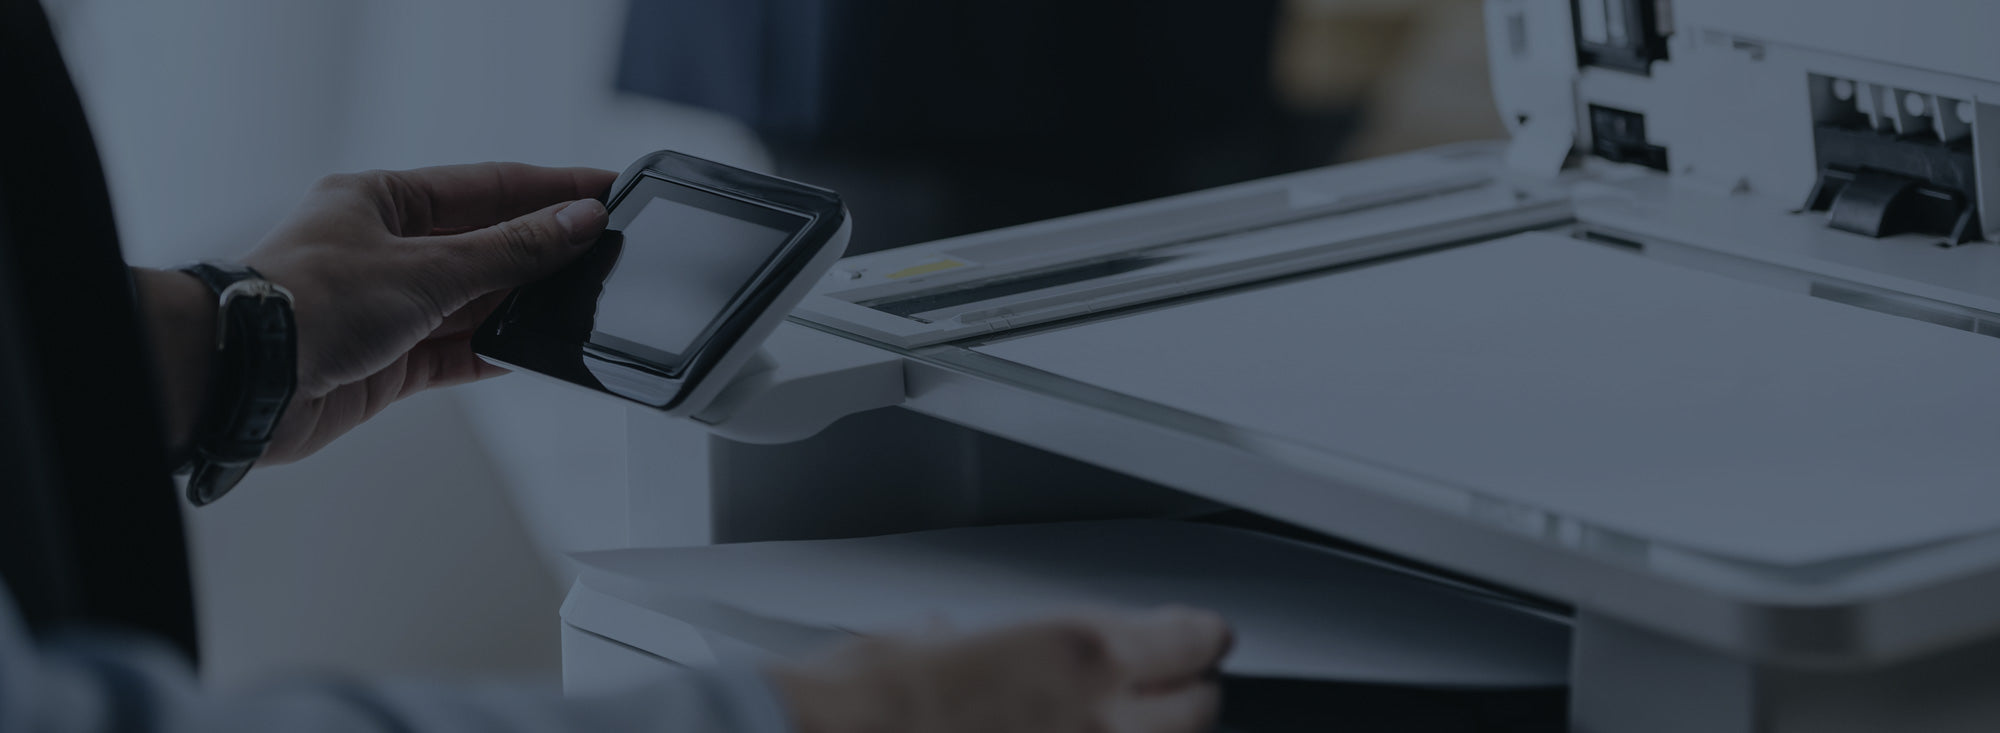 Our professional services save you time and money on your printer fleet.